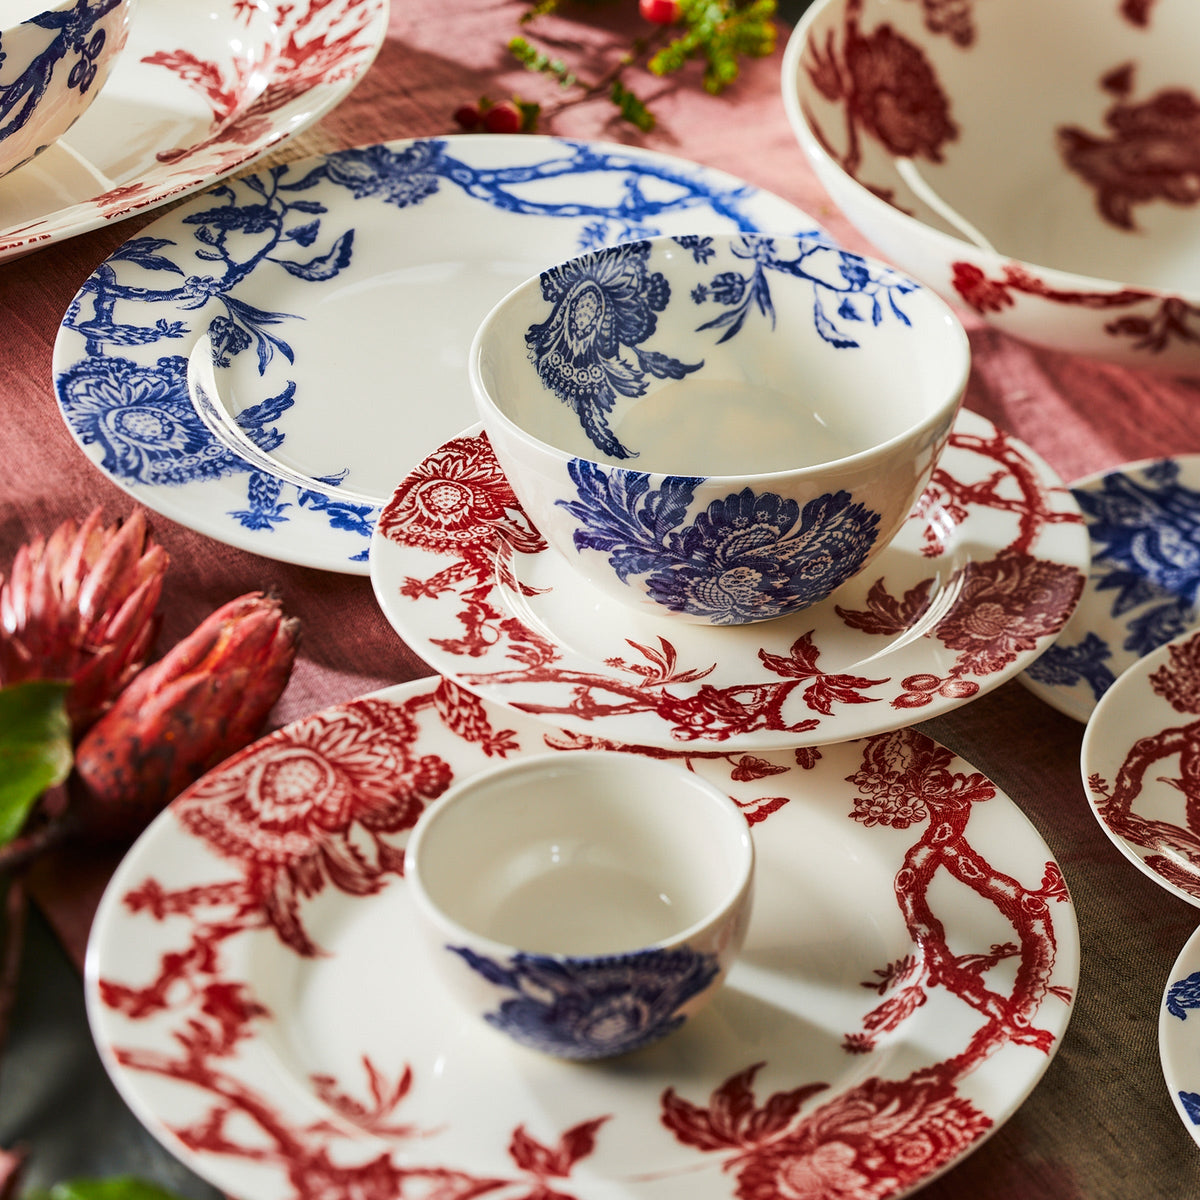 A table setting featuring premium porcelain dinnerware with white ceramic dishes adorned with intricate red and blue floral patterns. The set includes the Caskata Artisanal Home Arcadia Crimson Rimmed Salad Plates, bowls, and cups arranged on a pinkish tablecloth with floral accents, giving the display an heirloom feel.